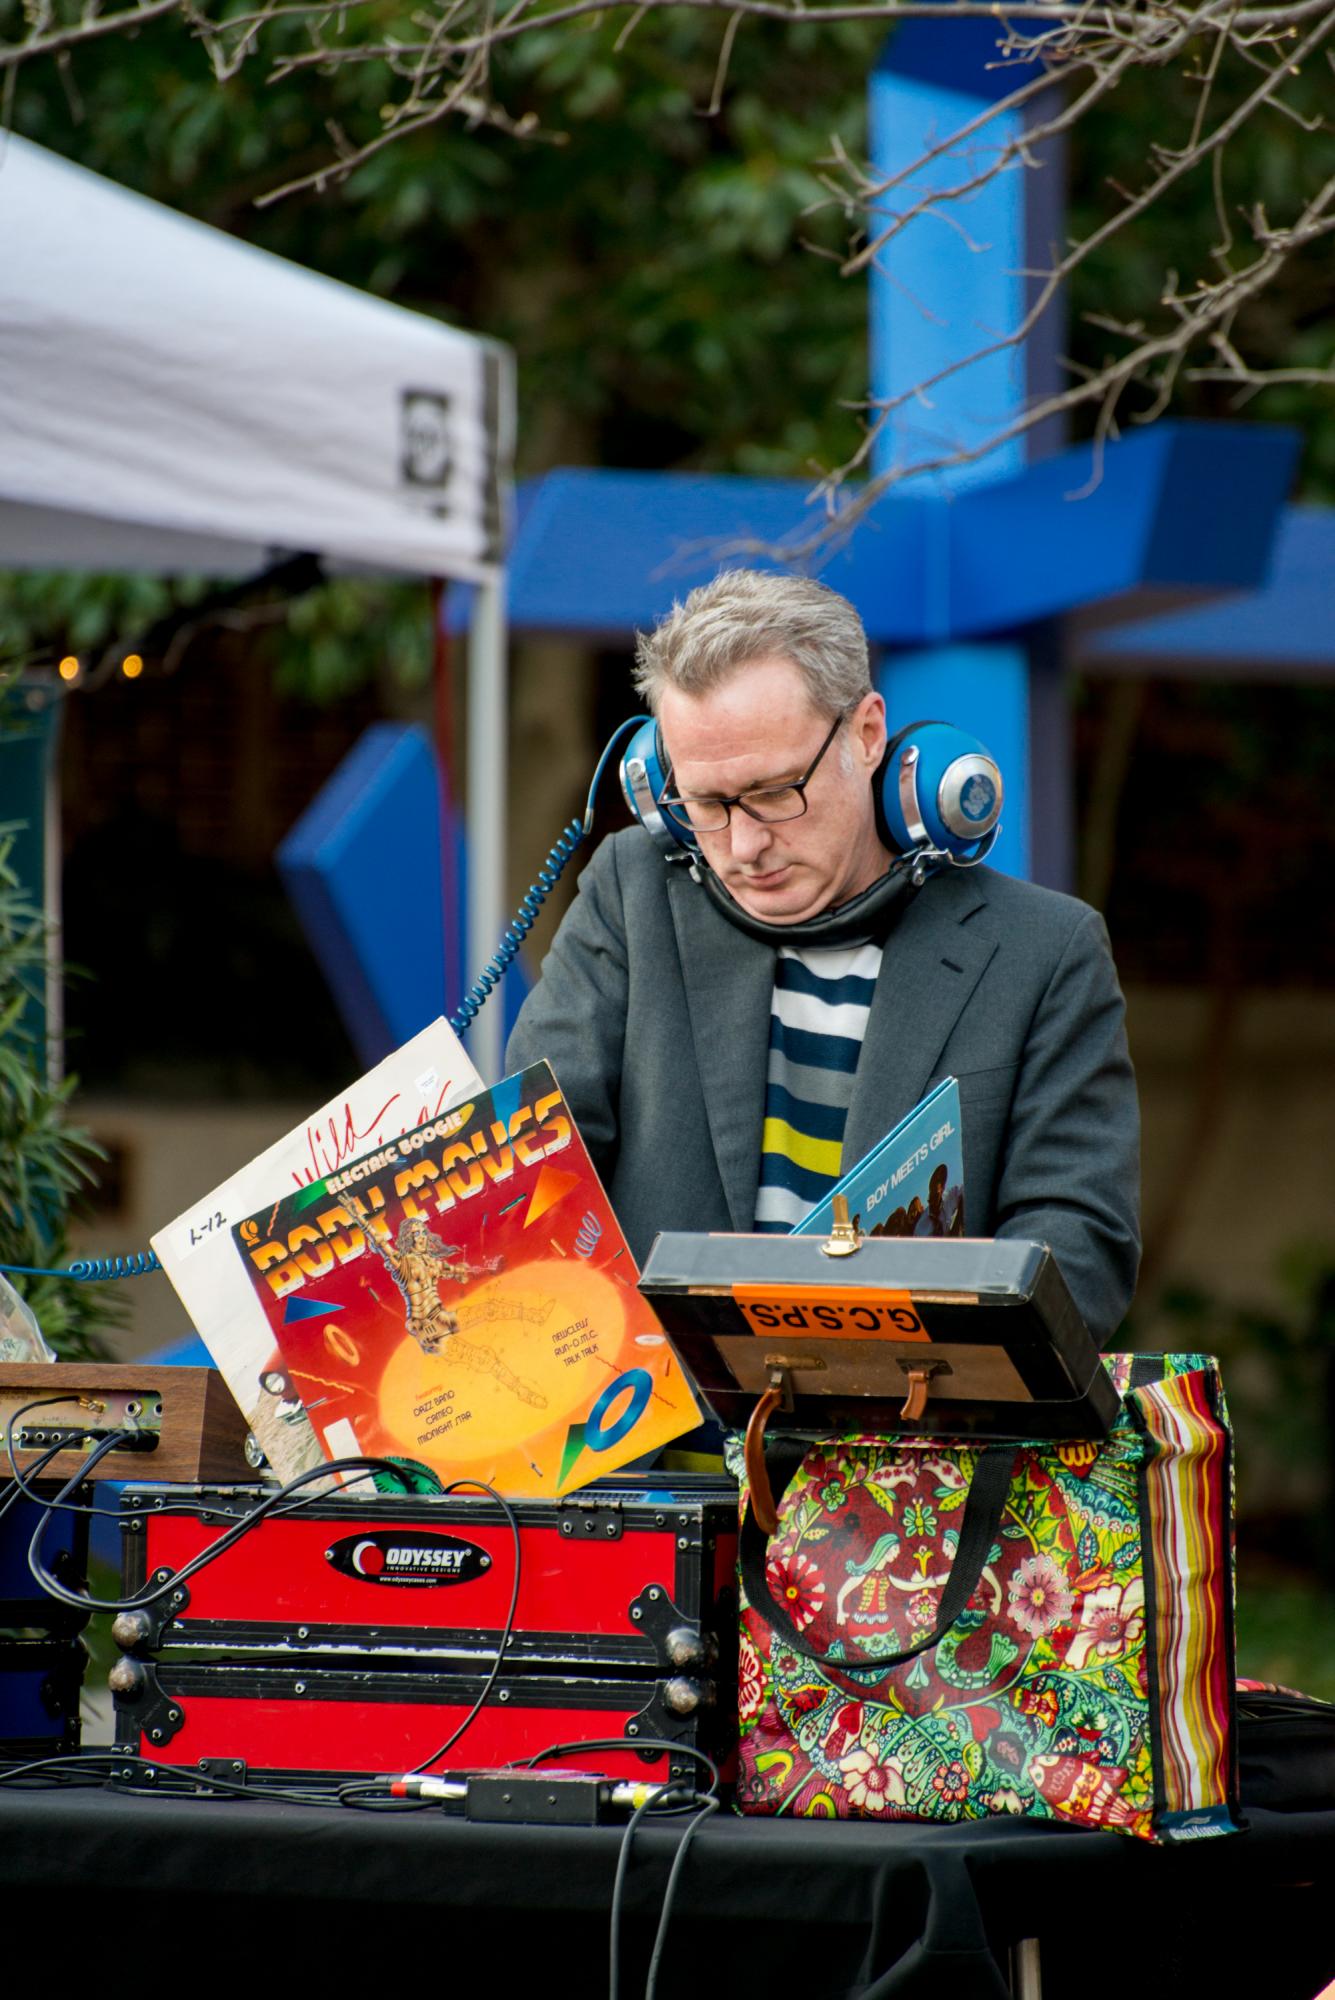 dj at arts and draughts in march 2018